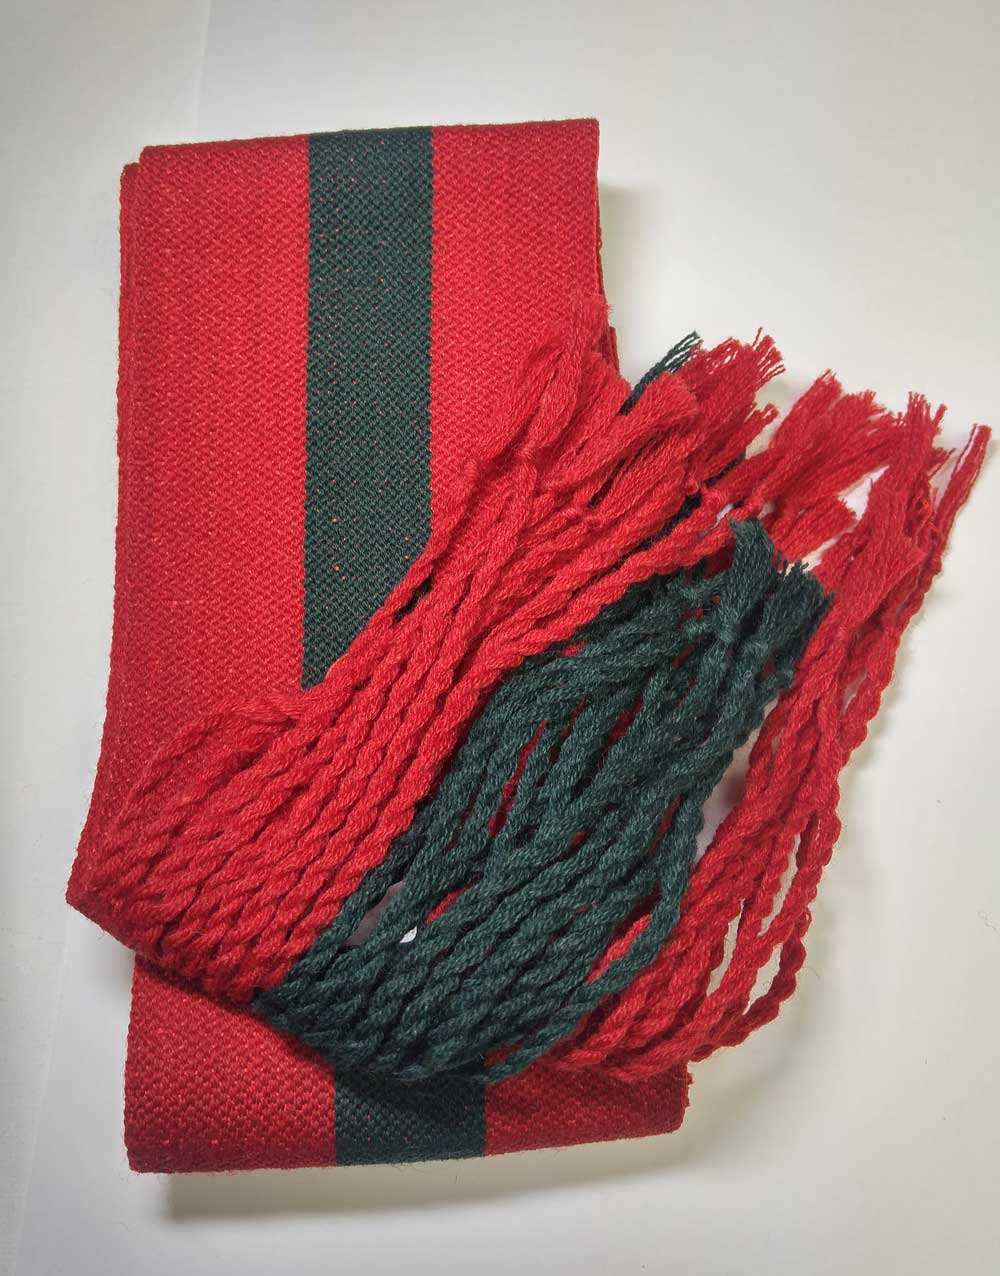 Sash: Sgt., Red with Green Stripe, 18/19C